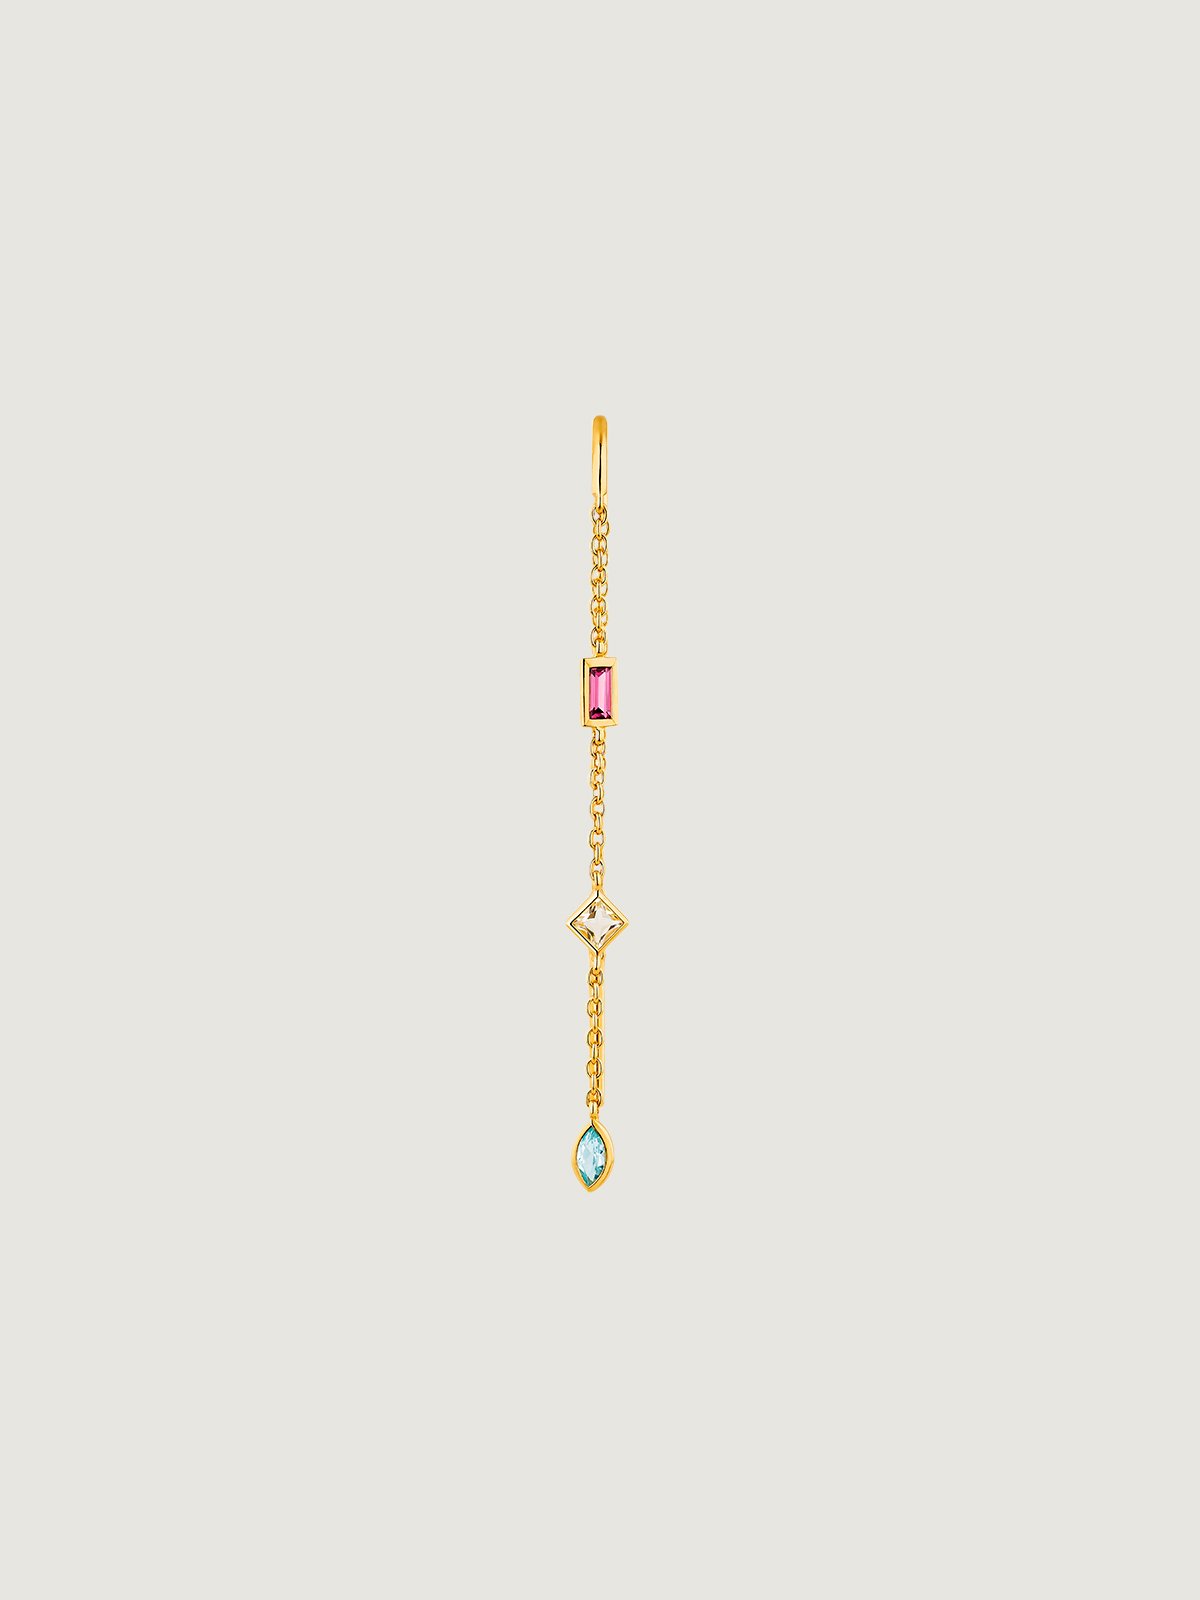 Individual earring made of 925 silver, bathed in 18K yellow gold with rhodolite, quartz and topaz.